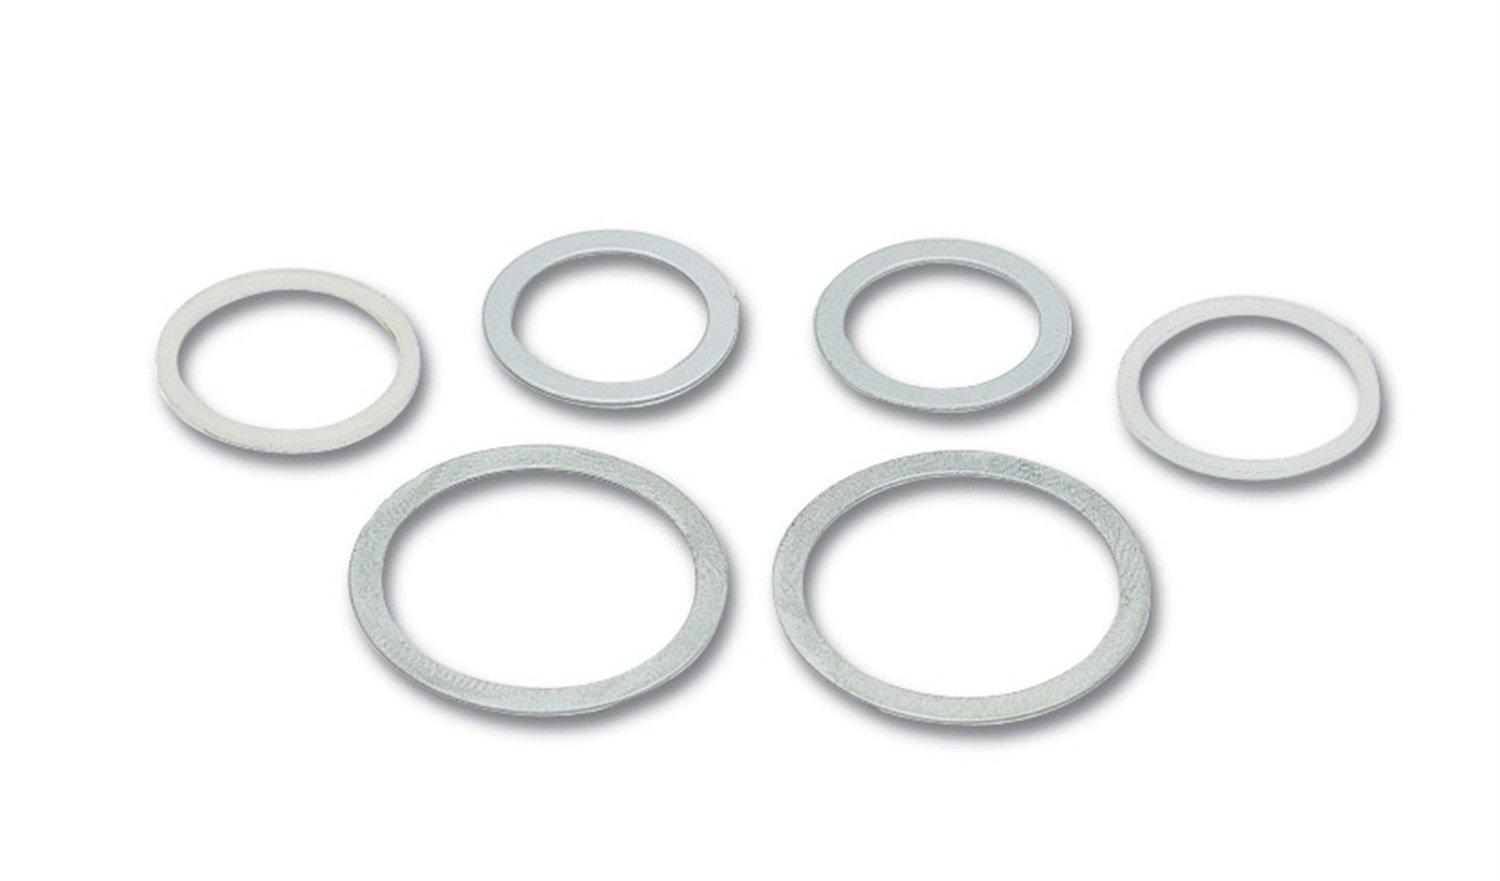 Carb Fitting Sealing Washers Fits 7/8" x 20 Carb Fittings